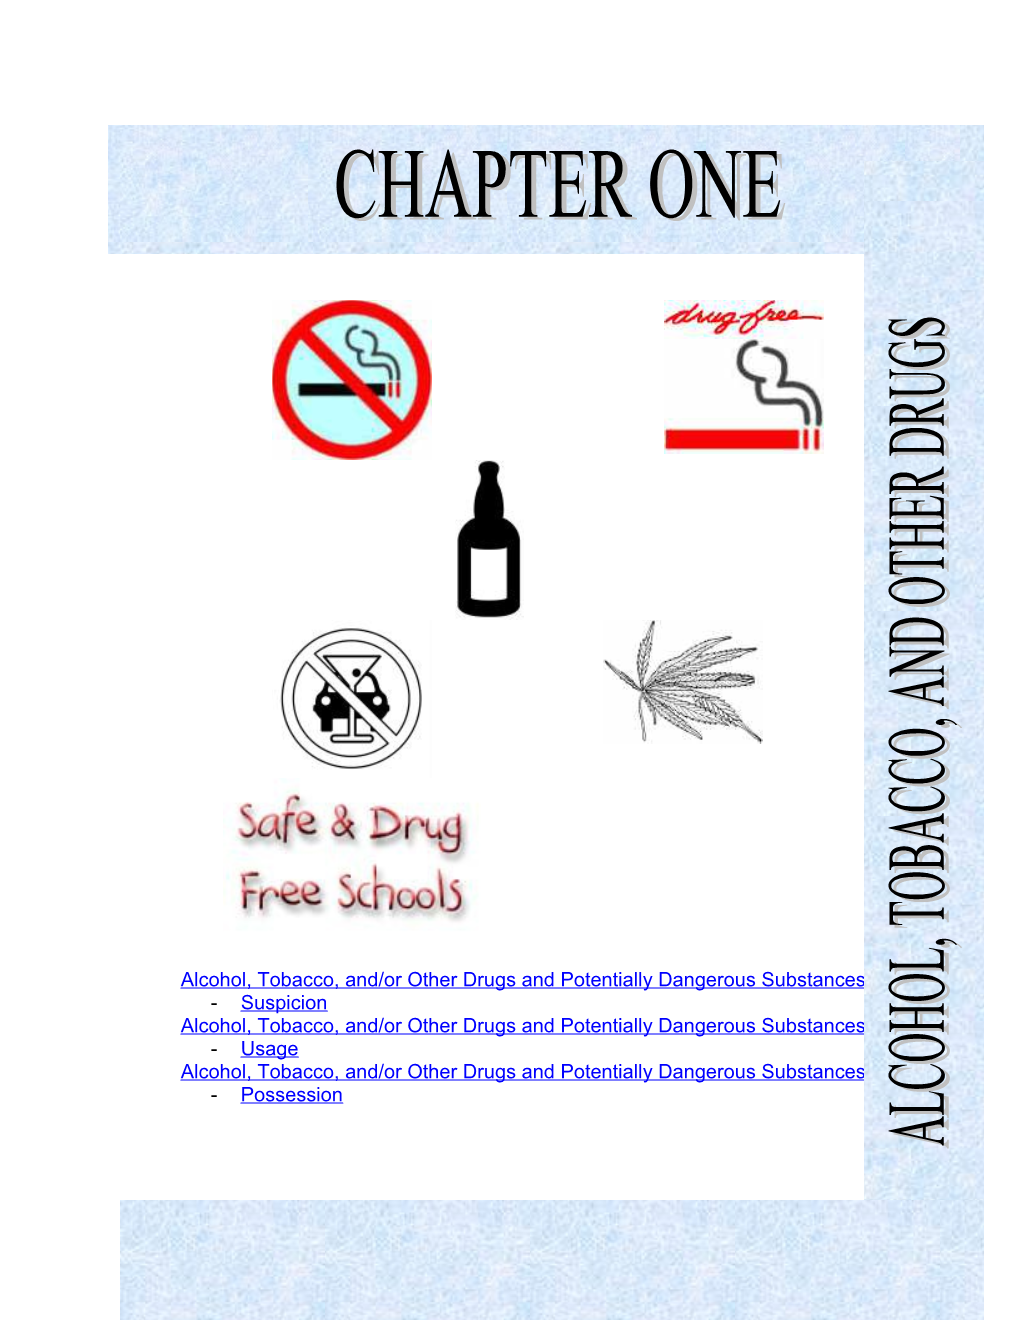 Alcohol, Tobacco, And/Or Other Drugs and Potentially Dangerous Substances